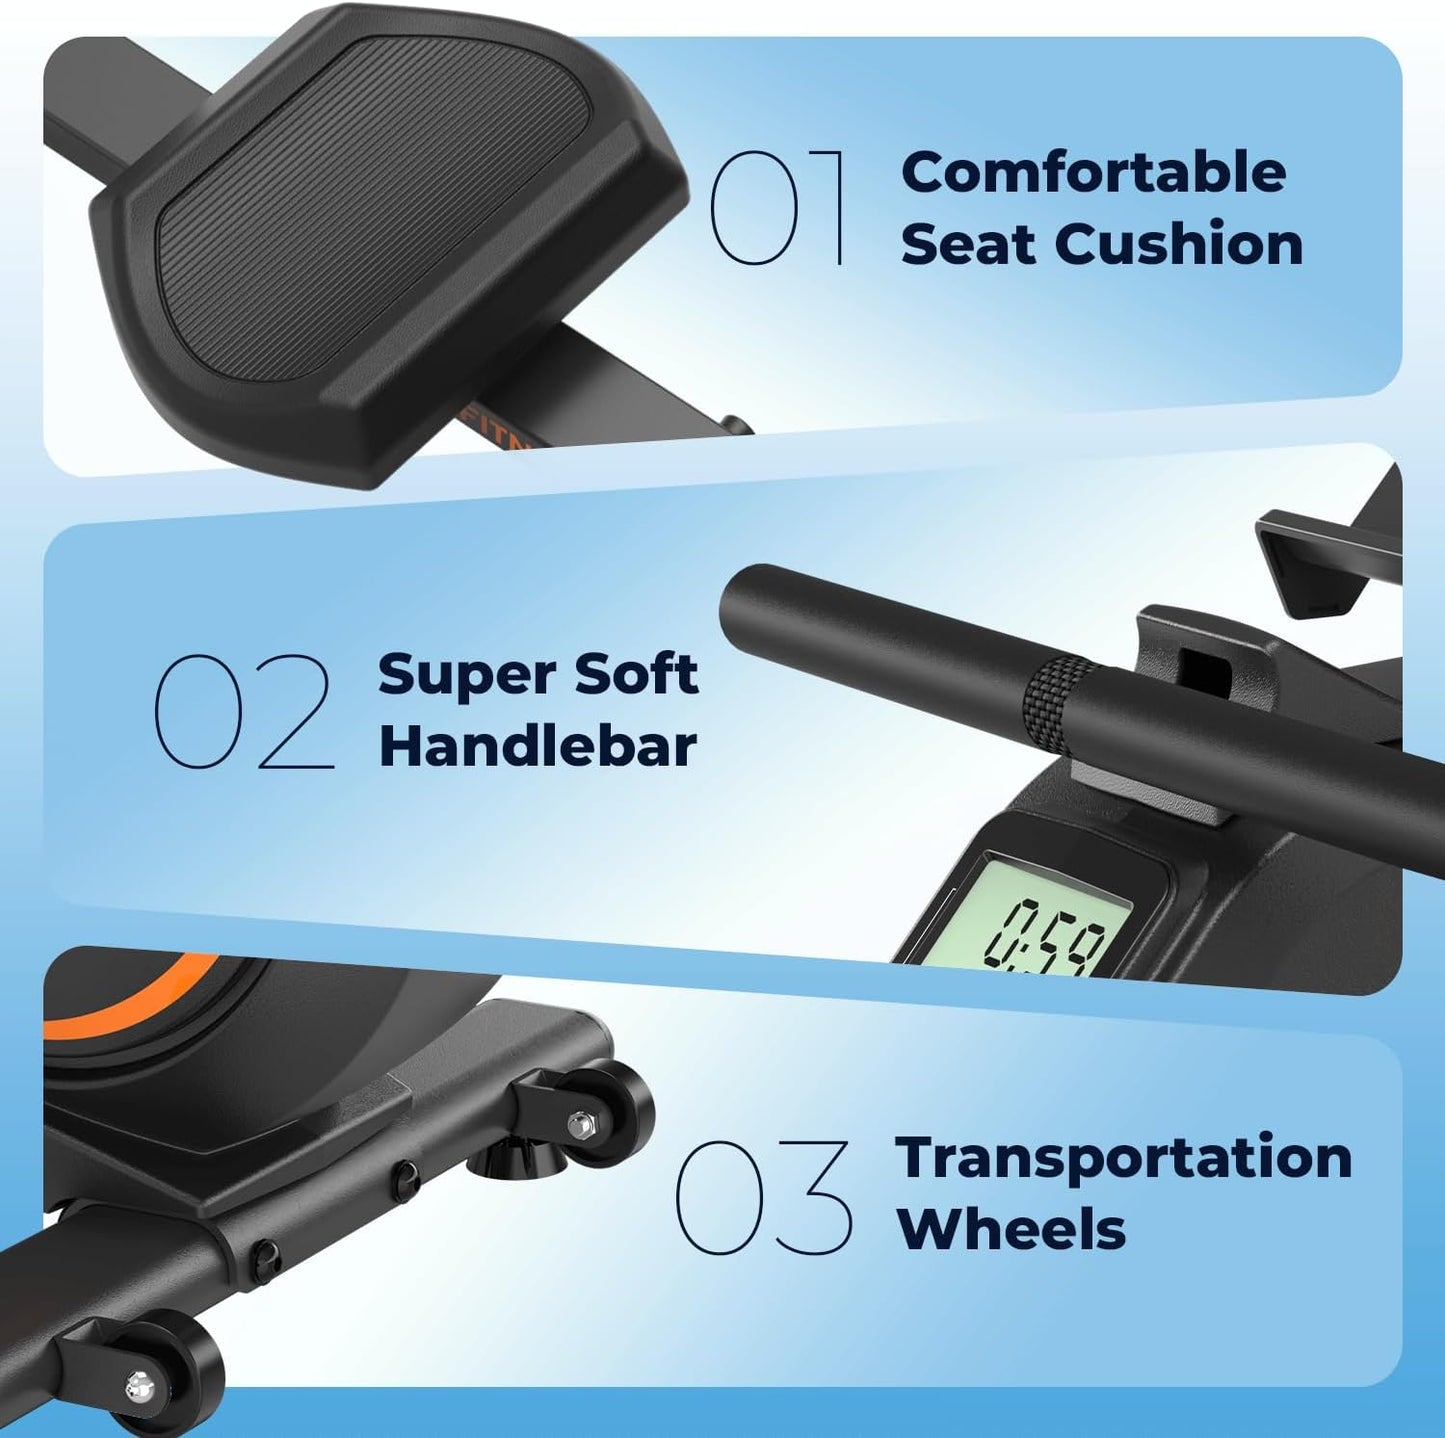 Magnetic/Water Rowing Machine 350 LB Weight Capacity - Foldable Rower for Home Use with Bluetooth, App Supported, Tablet Holder and Comfortable Seat Cushion